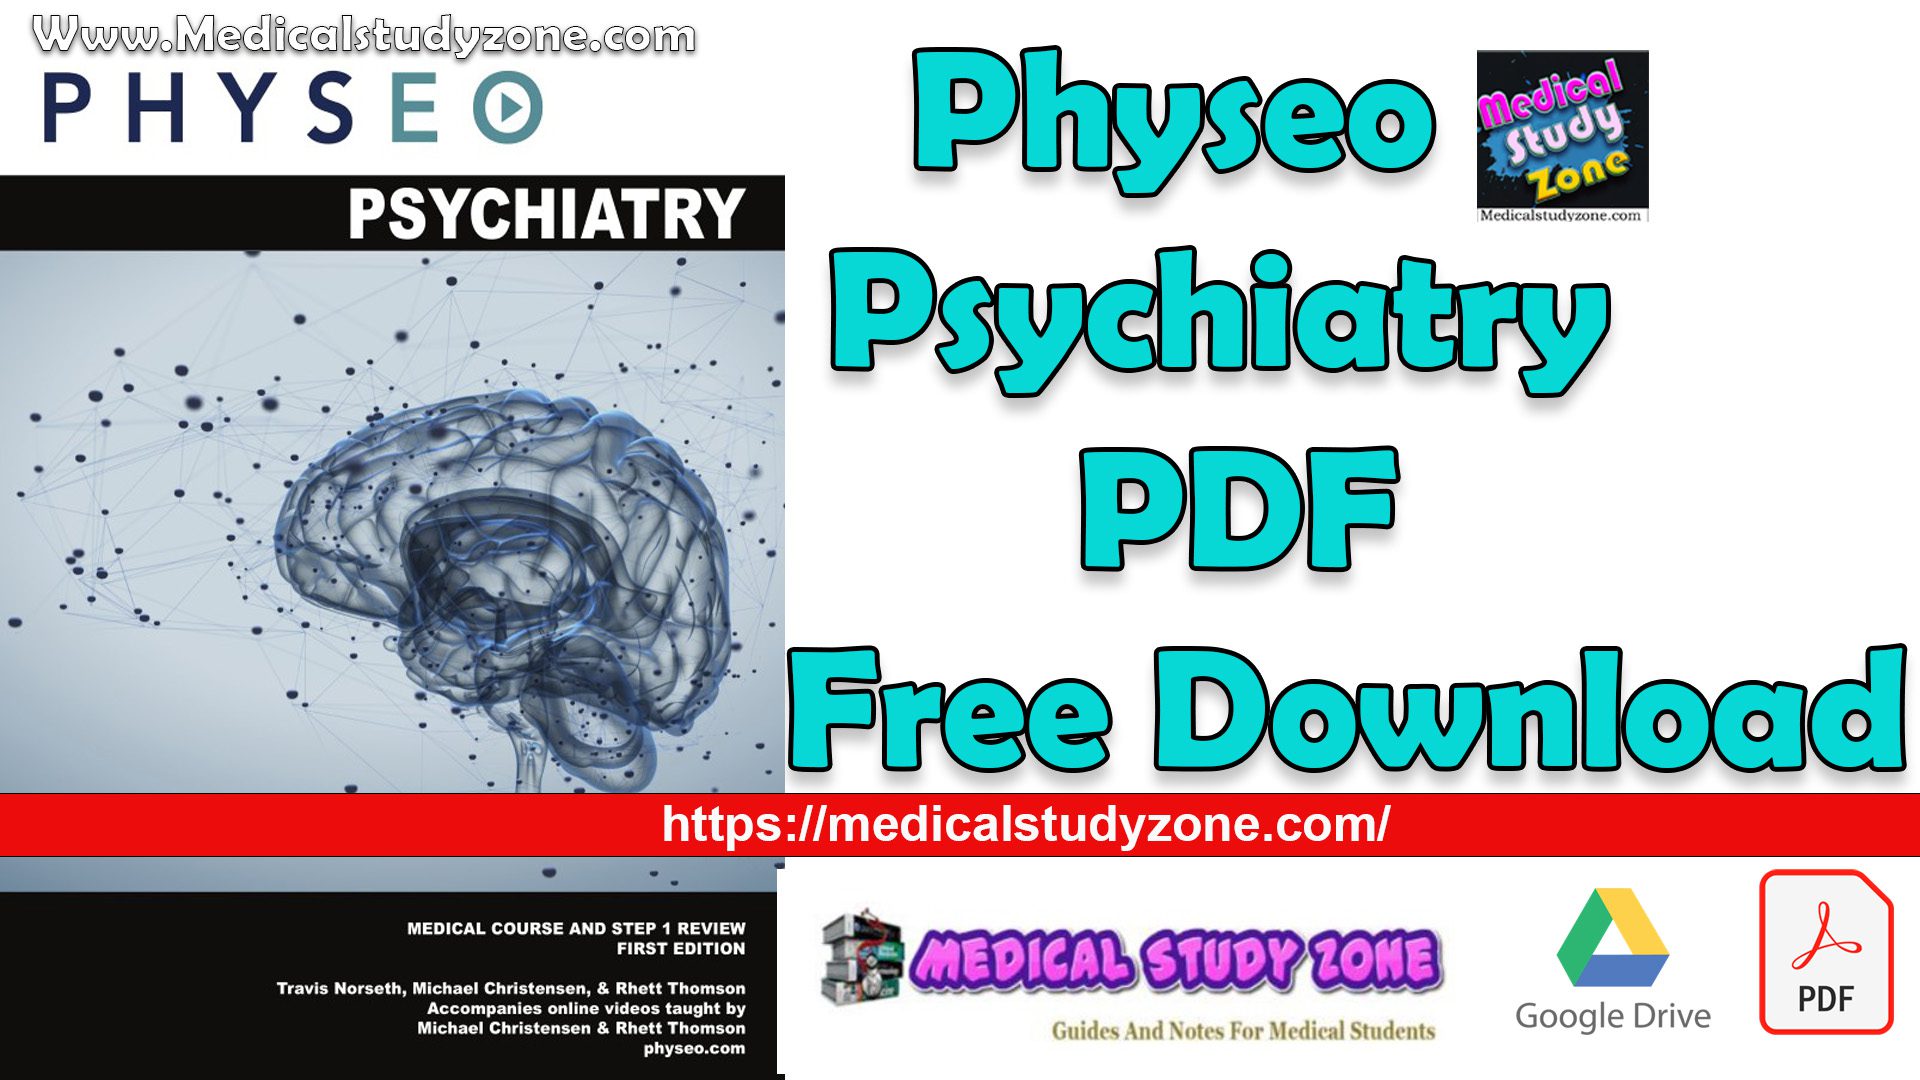 Physeo Psychiatry PDF Free Download